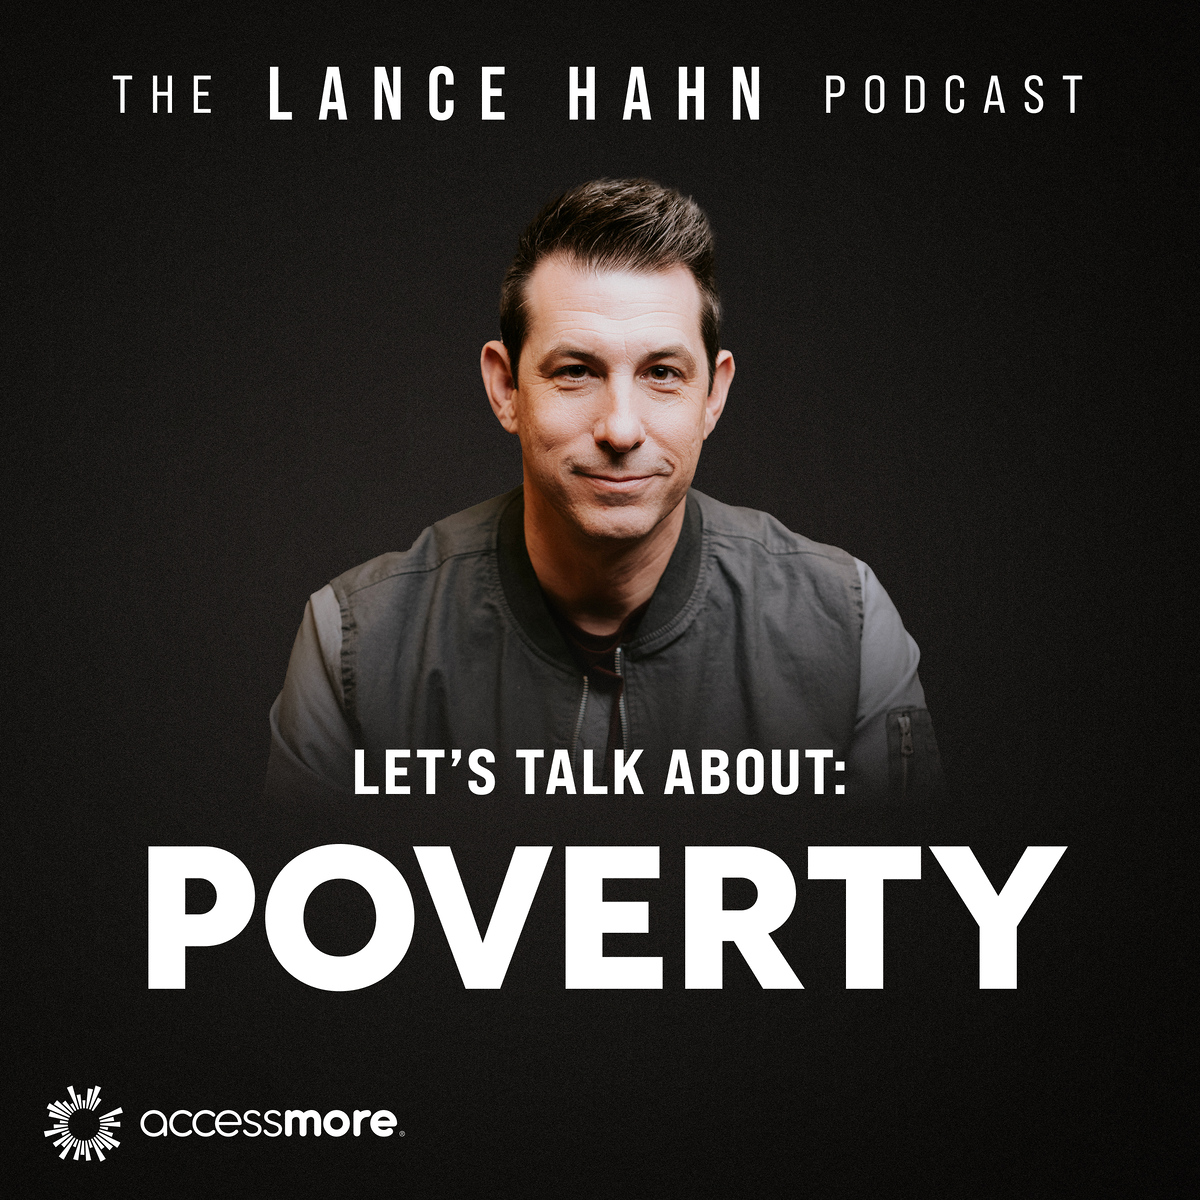 Let's Talk About Poverty